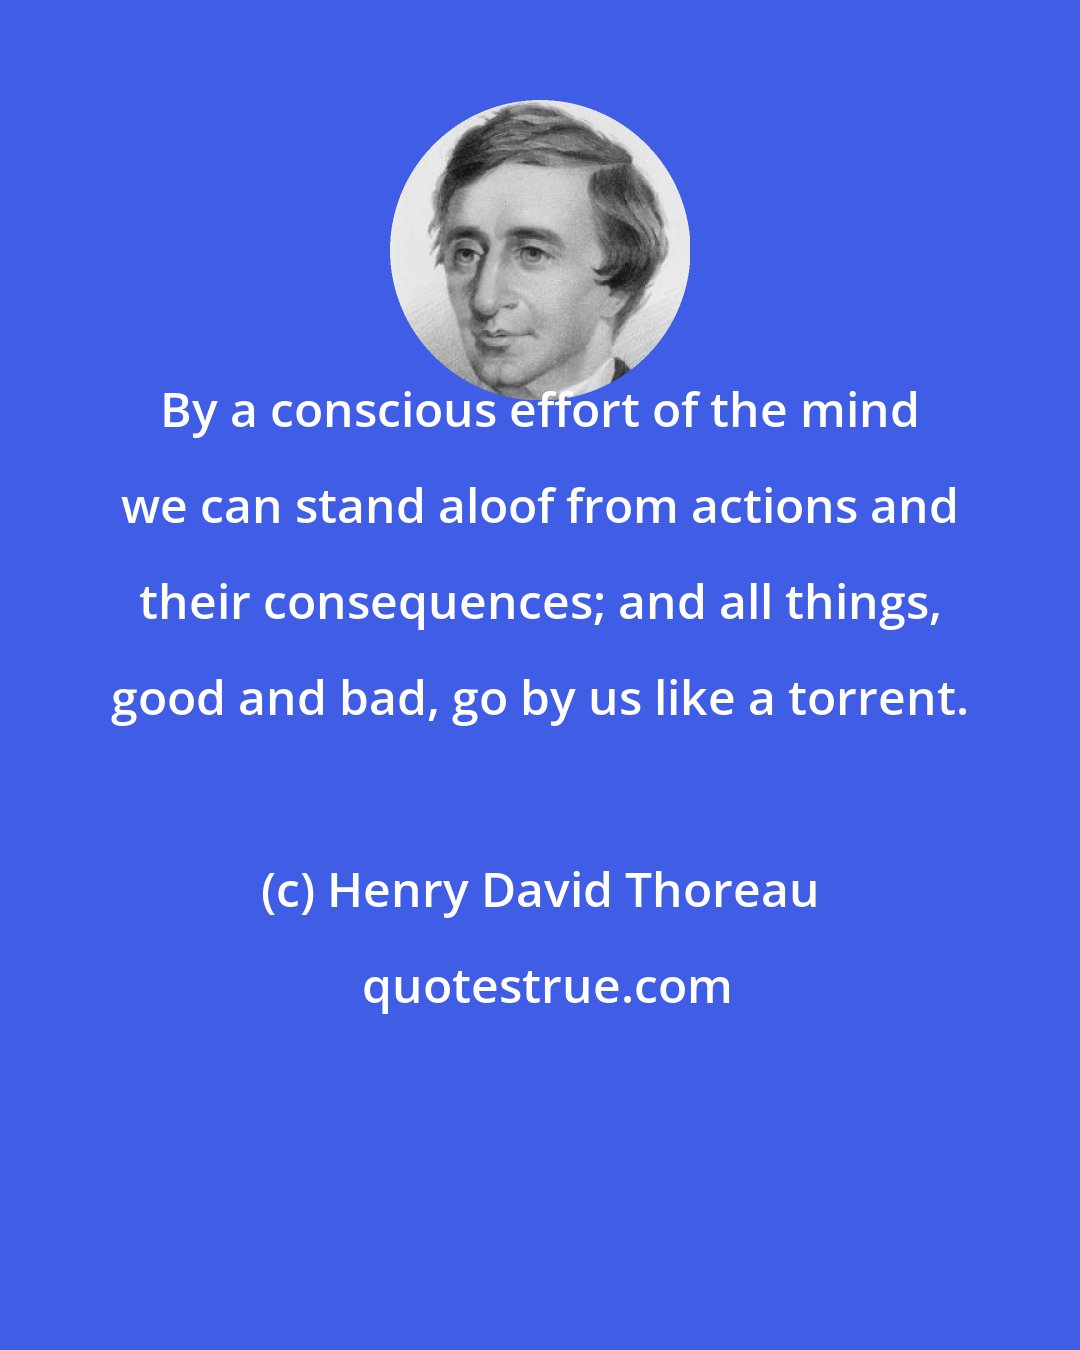 Henry David Thoreau: By a conscious effort of the mind we can stand aloof from actions and their consequences; and all things, good and bad, go by us like a torrent.